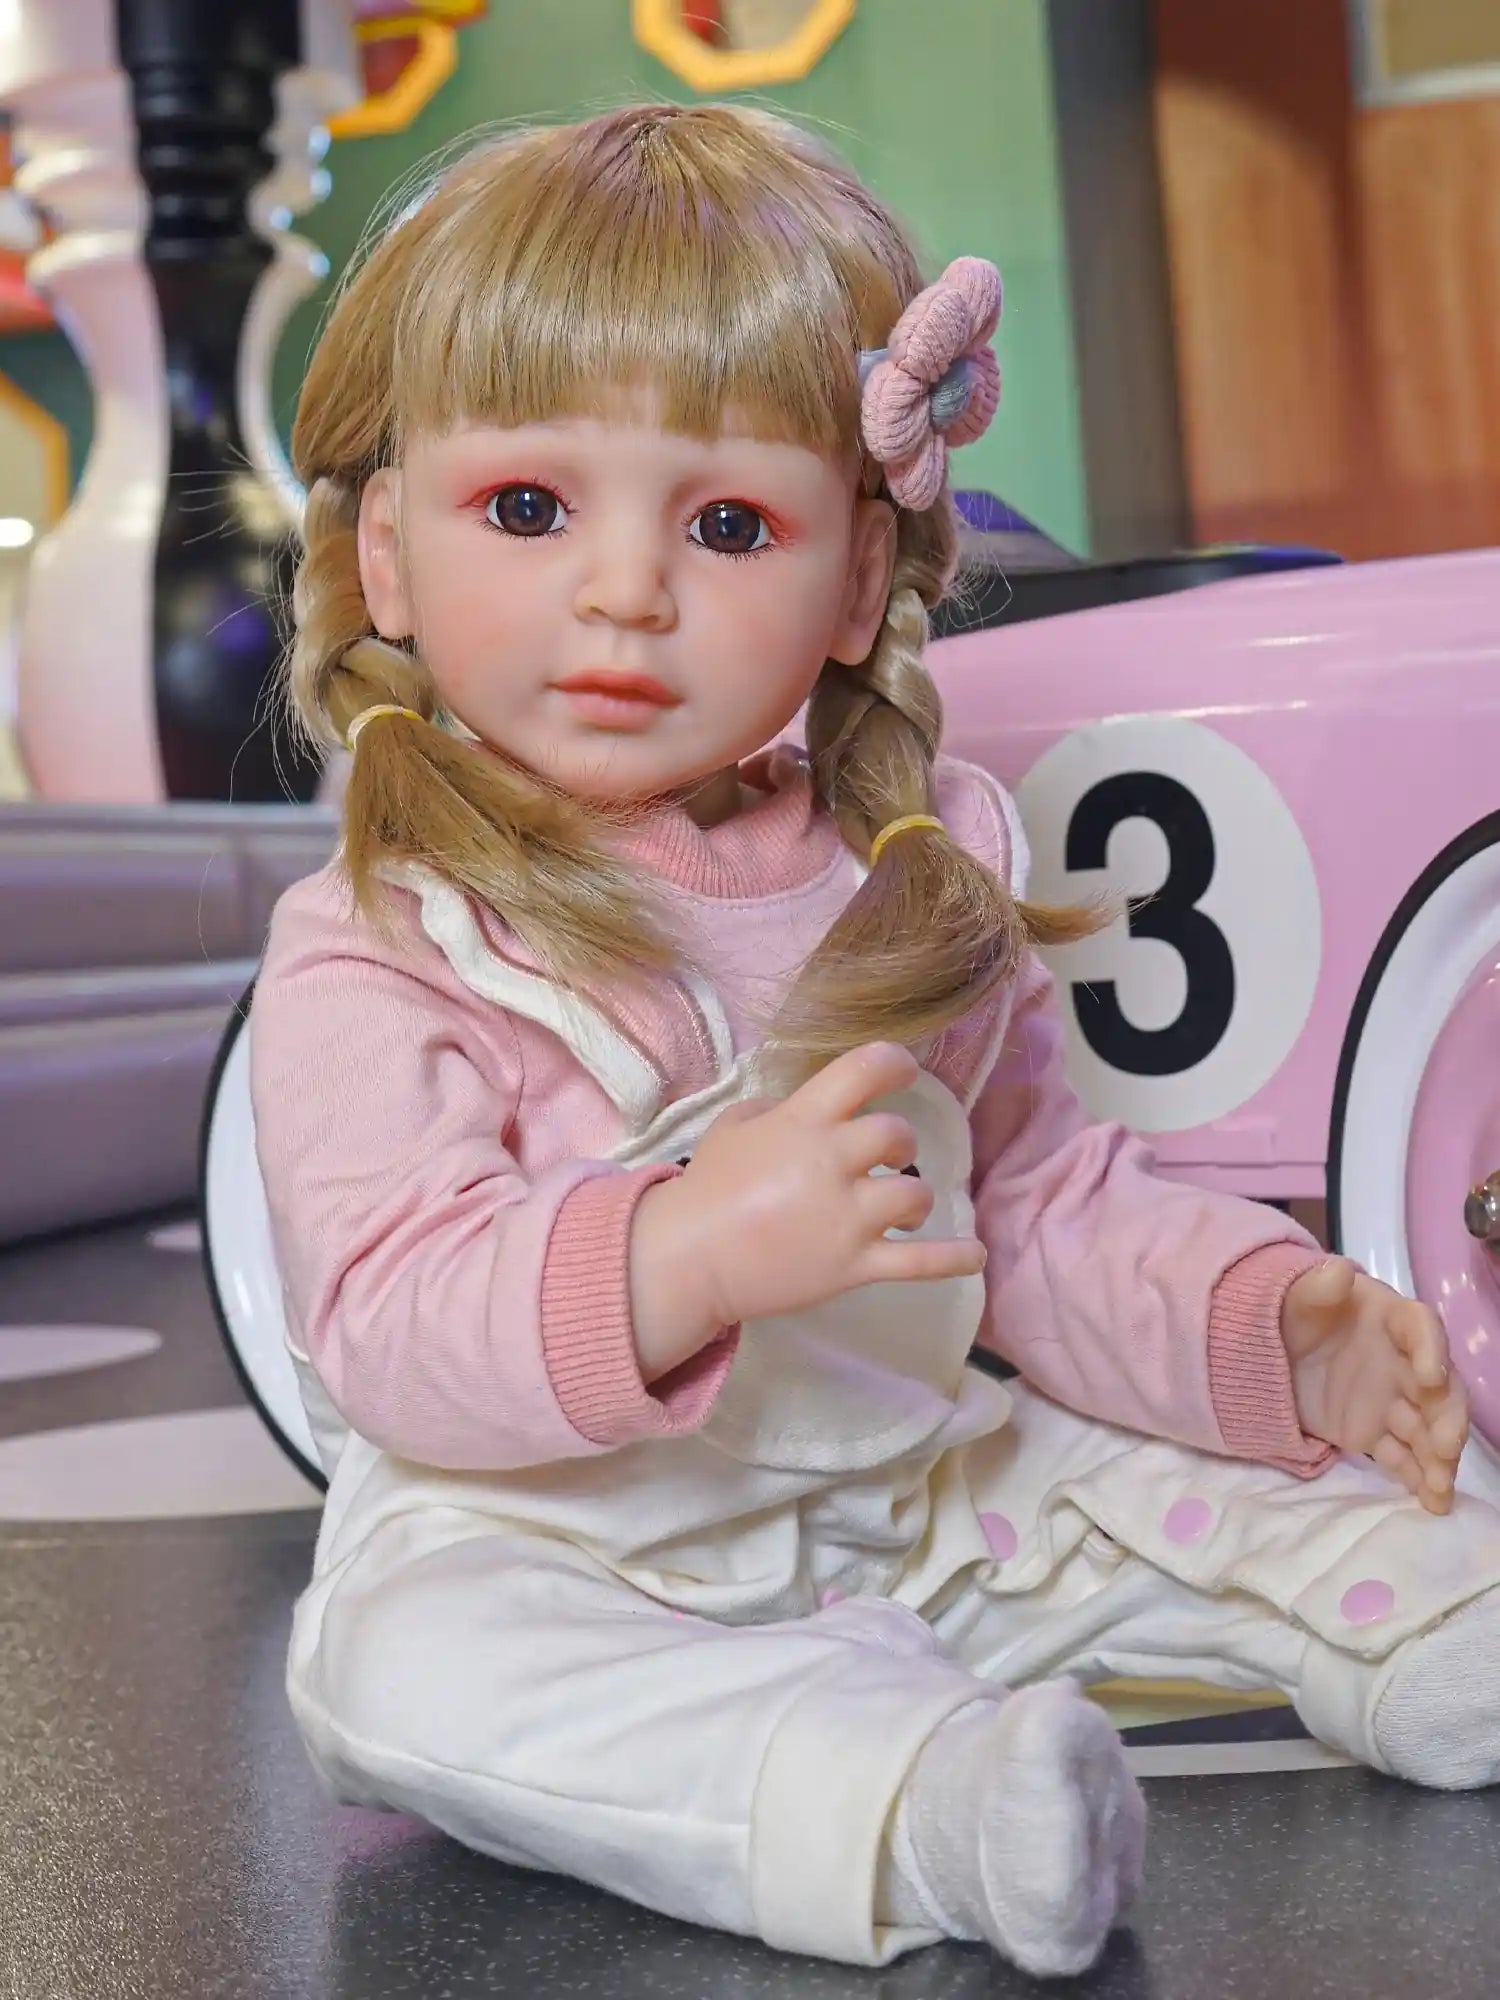 Close-up of a toddler doll with blonde braids and purple hair ties, pink cheeks, seated indoors.